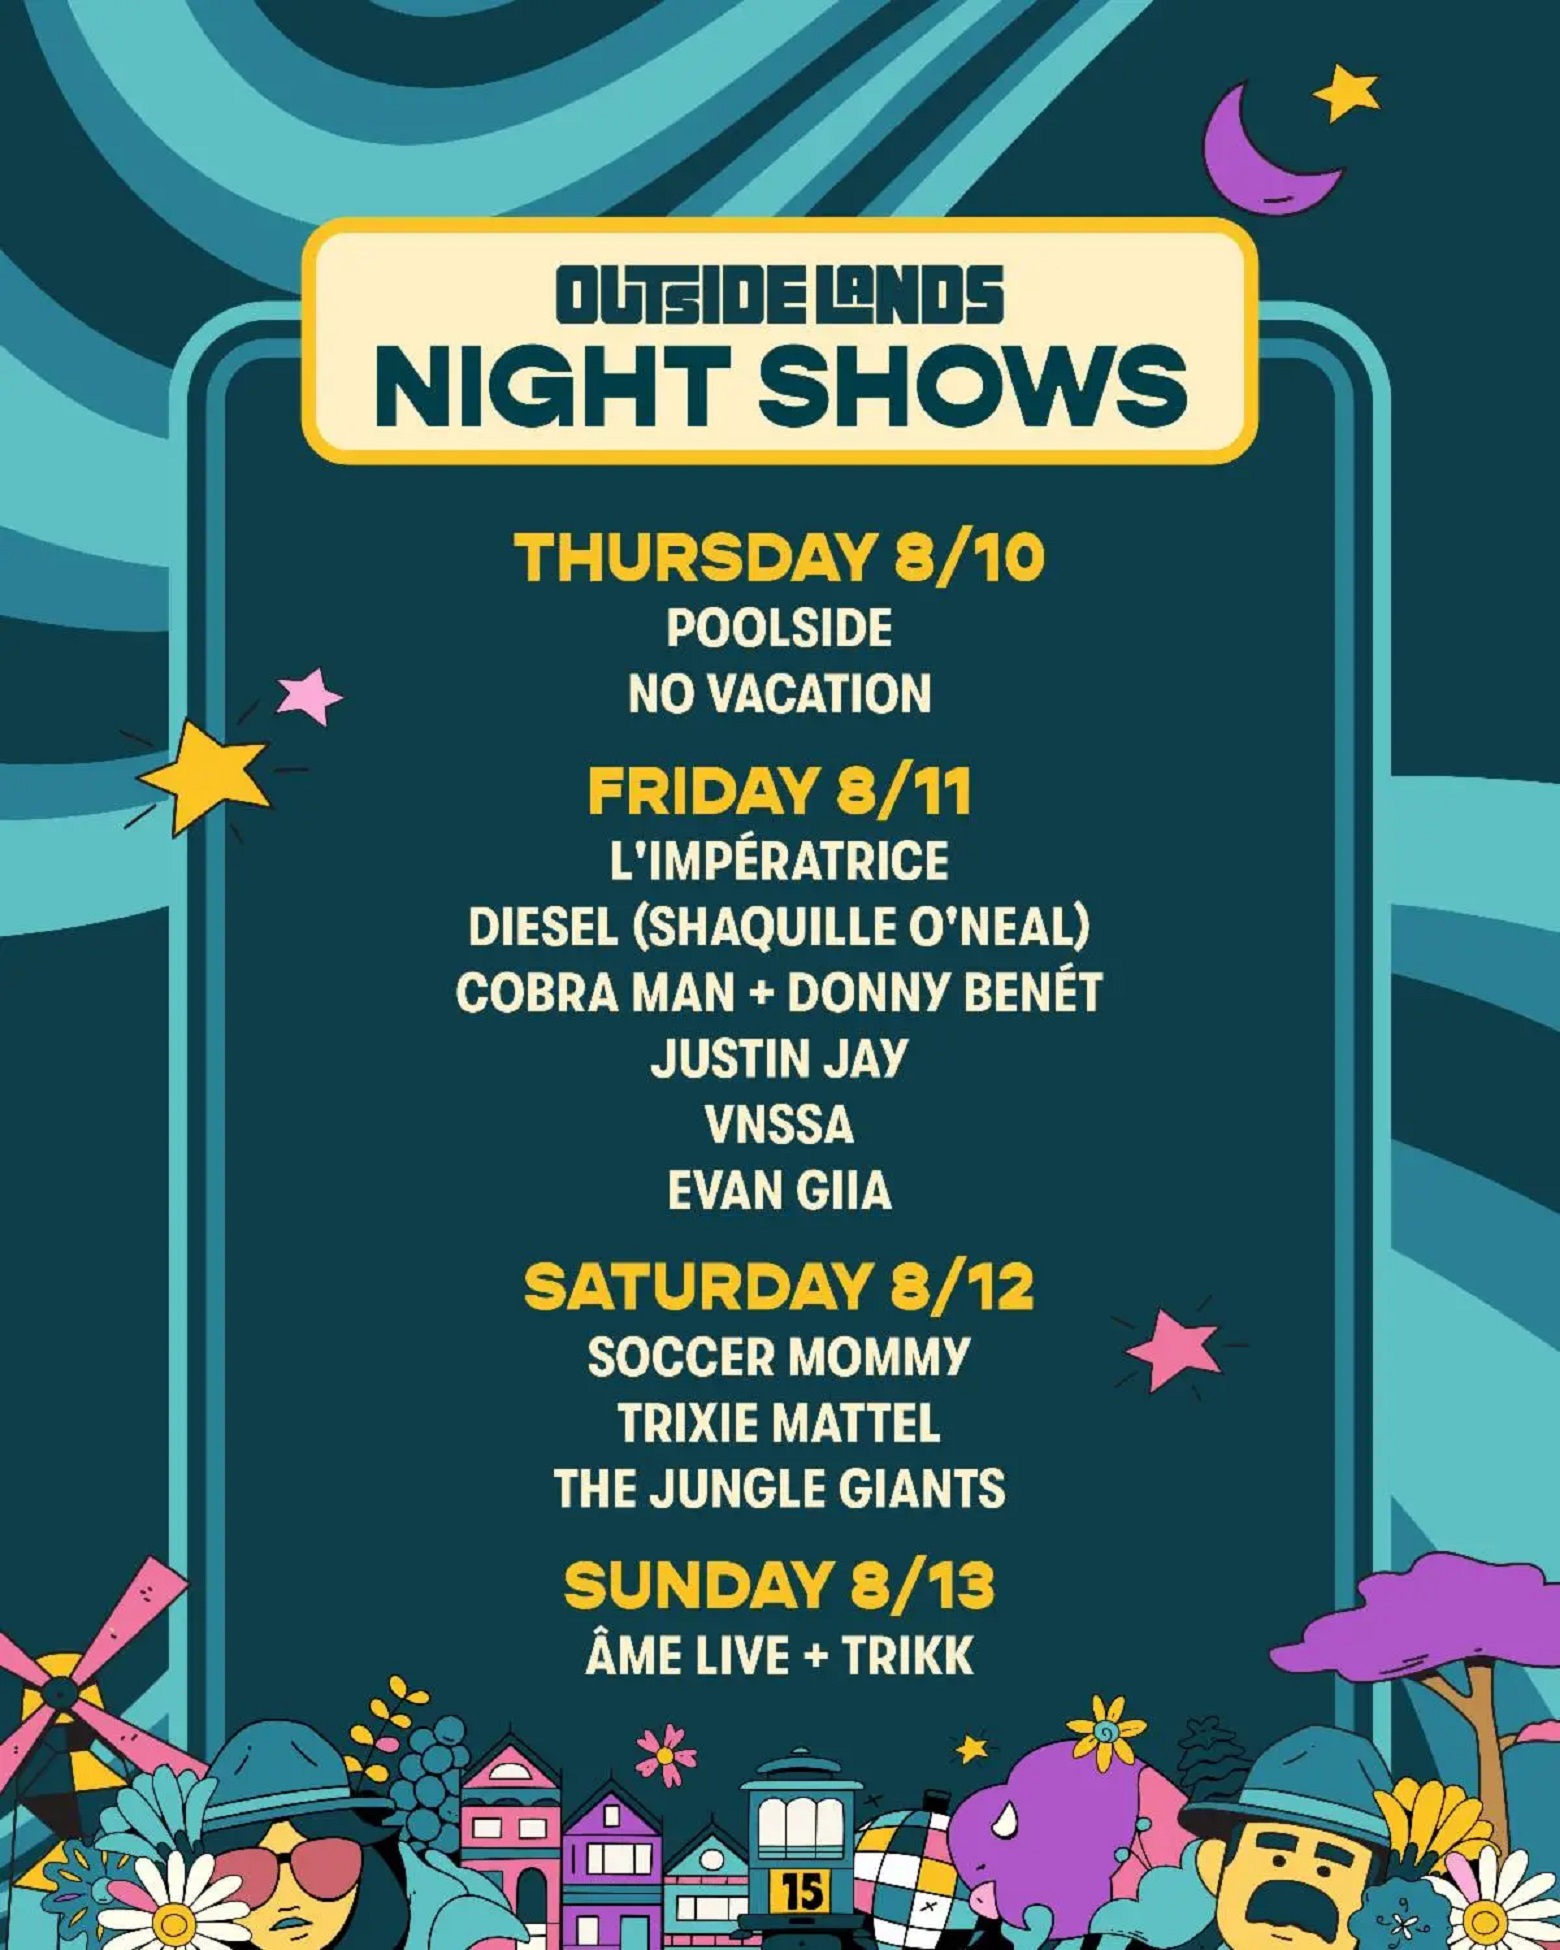 Outside Lands Announces Night Shows Lineups